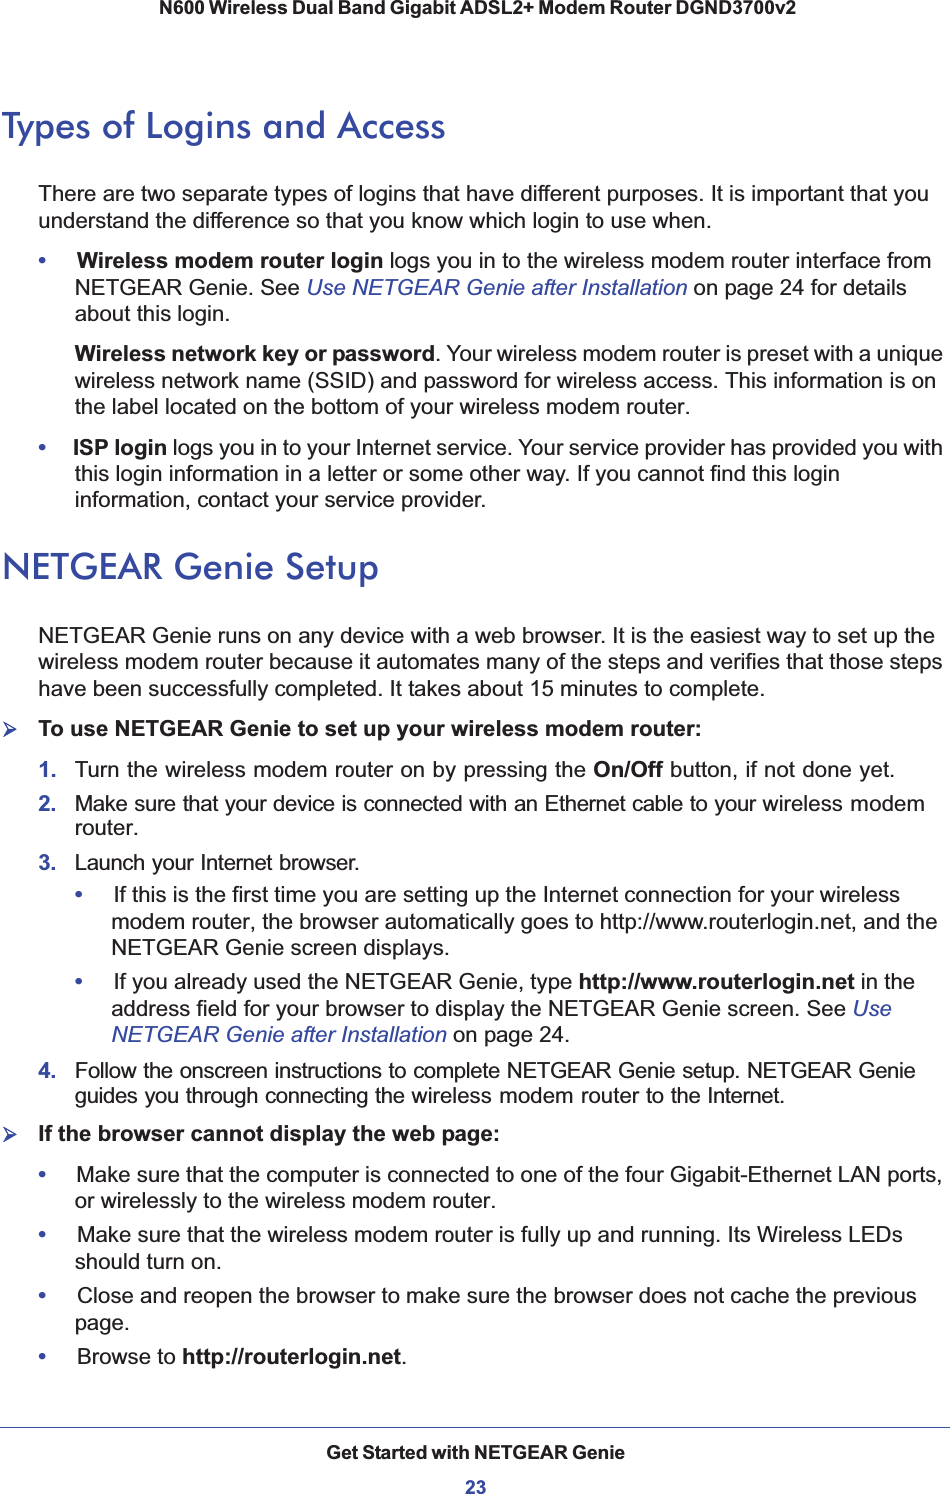 Get Started with NETGEAR Genie23 N600 Wireless Dual Band Gigabit ADSL2+ Modem Router DGND3700v2Types of Logins and AccessThere are two separate types of logins that have different purposes. It is important that you understand the difference so that you know which login to use when.•     Wireless modem router login logs you in to the wireless modem router interface from NETGEAR Genie. See Use NETGEAR Genie after Installation on page 24 for details about this login.Wireless network key or password. Your wireless modem router is preset with a unique wireless network name (SSID) and password for wireless access. This information is on the label located on the bottom of your wireless modem router.•     ISP login logs you in to your Internet service. Your service provider has provided you with this login information in a letter or some other way. If you cannot find this login information, contact your service provider.NETGEAR Genie SetupNETGEAR Genie runs on any device with a web browser. It is the easiest way to set up the wireless modem router because it automates many of the steps and verifies that those steps have been successfully completed. It takes about 15 minutes to complete. ¾To use NETGEAR Genie to set up your wireless modem router:1.  Turn the wireless modem router on by pressing the On/Off button, if not done yet. 2. Make sure that your device is connected with an Ethernet cable to your wireless modemrouter.3. Launch your Internet browser.•     If this is the first time you are setting up the Internet connection for your wireless modem router, the browser automatically goes to http://www.routerlogin.net, and the NETGEAR Genie screen displays.•     If you already used the NETGEAR Genie, type http://www.routerlogin.net in the address field for your browser to display the NETGEAR Genie screen. See UseNETGEAR Genie after Installation on page 24.4. Follow the onscreen instructions to complete NETGEAR Genie setup. NETGEAR Genie guides you through connecting the wireless modem router to the Internet. ¾If the browser cannot display the web page: •     Make sure that the computer is connected to one of the four Gigabit-Ethernet LAN ports, or wirelessly to the wireless modem router.•     Make sure that the wireless modem router is fully up and running. Its Wireless LEDs should turn on.•     Close and reopen the browser to make sure the browser does not cache the previous page.•     Browse to http://routerlogin.net.